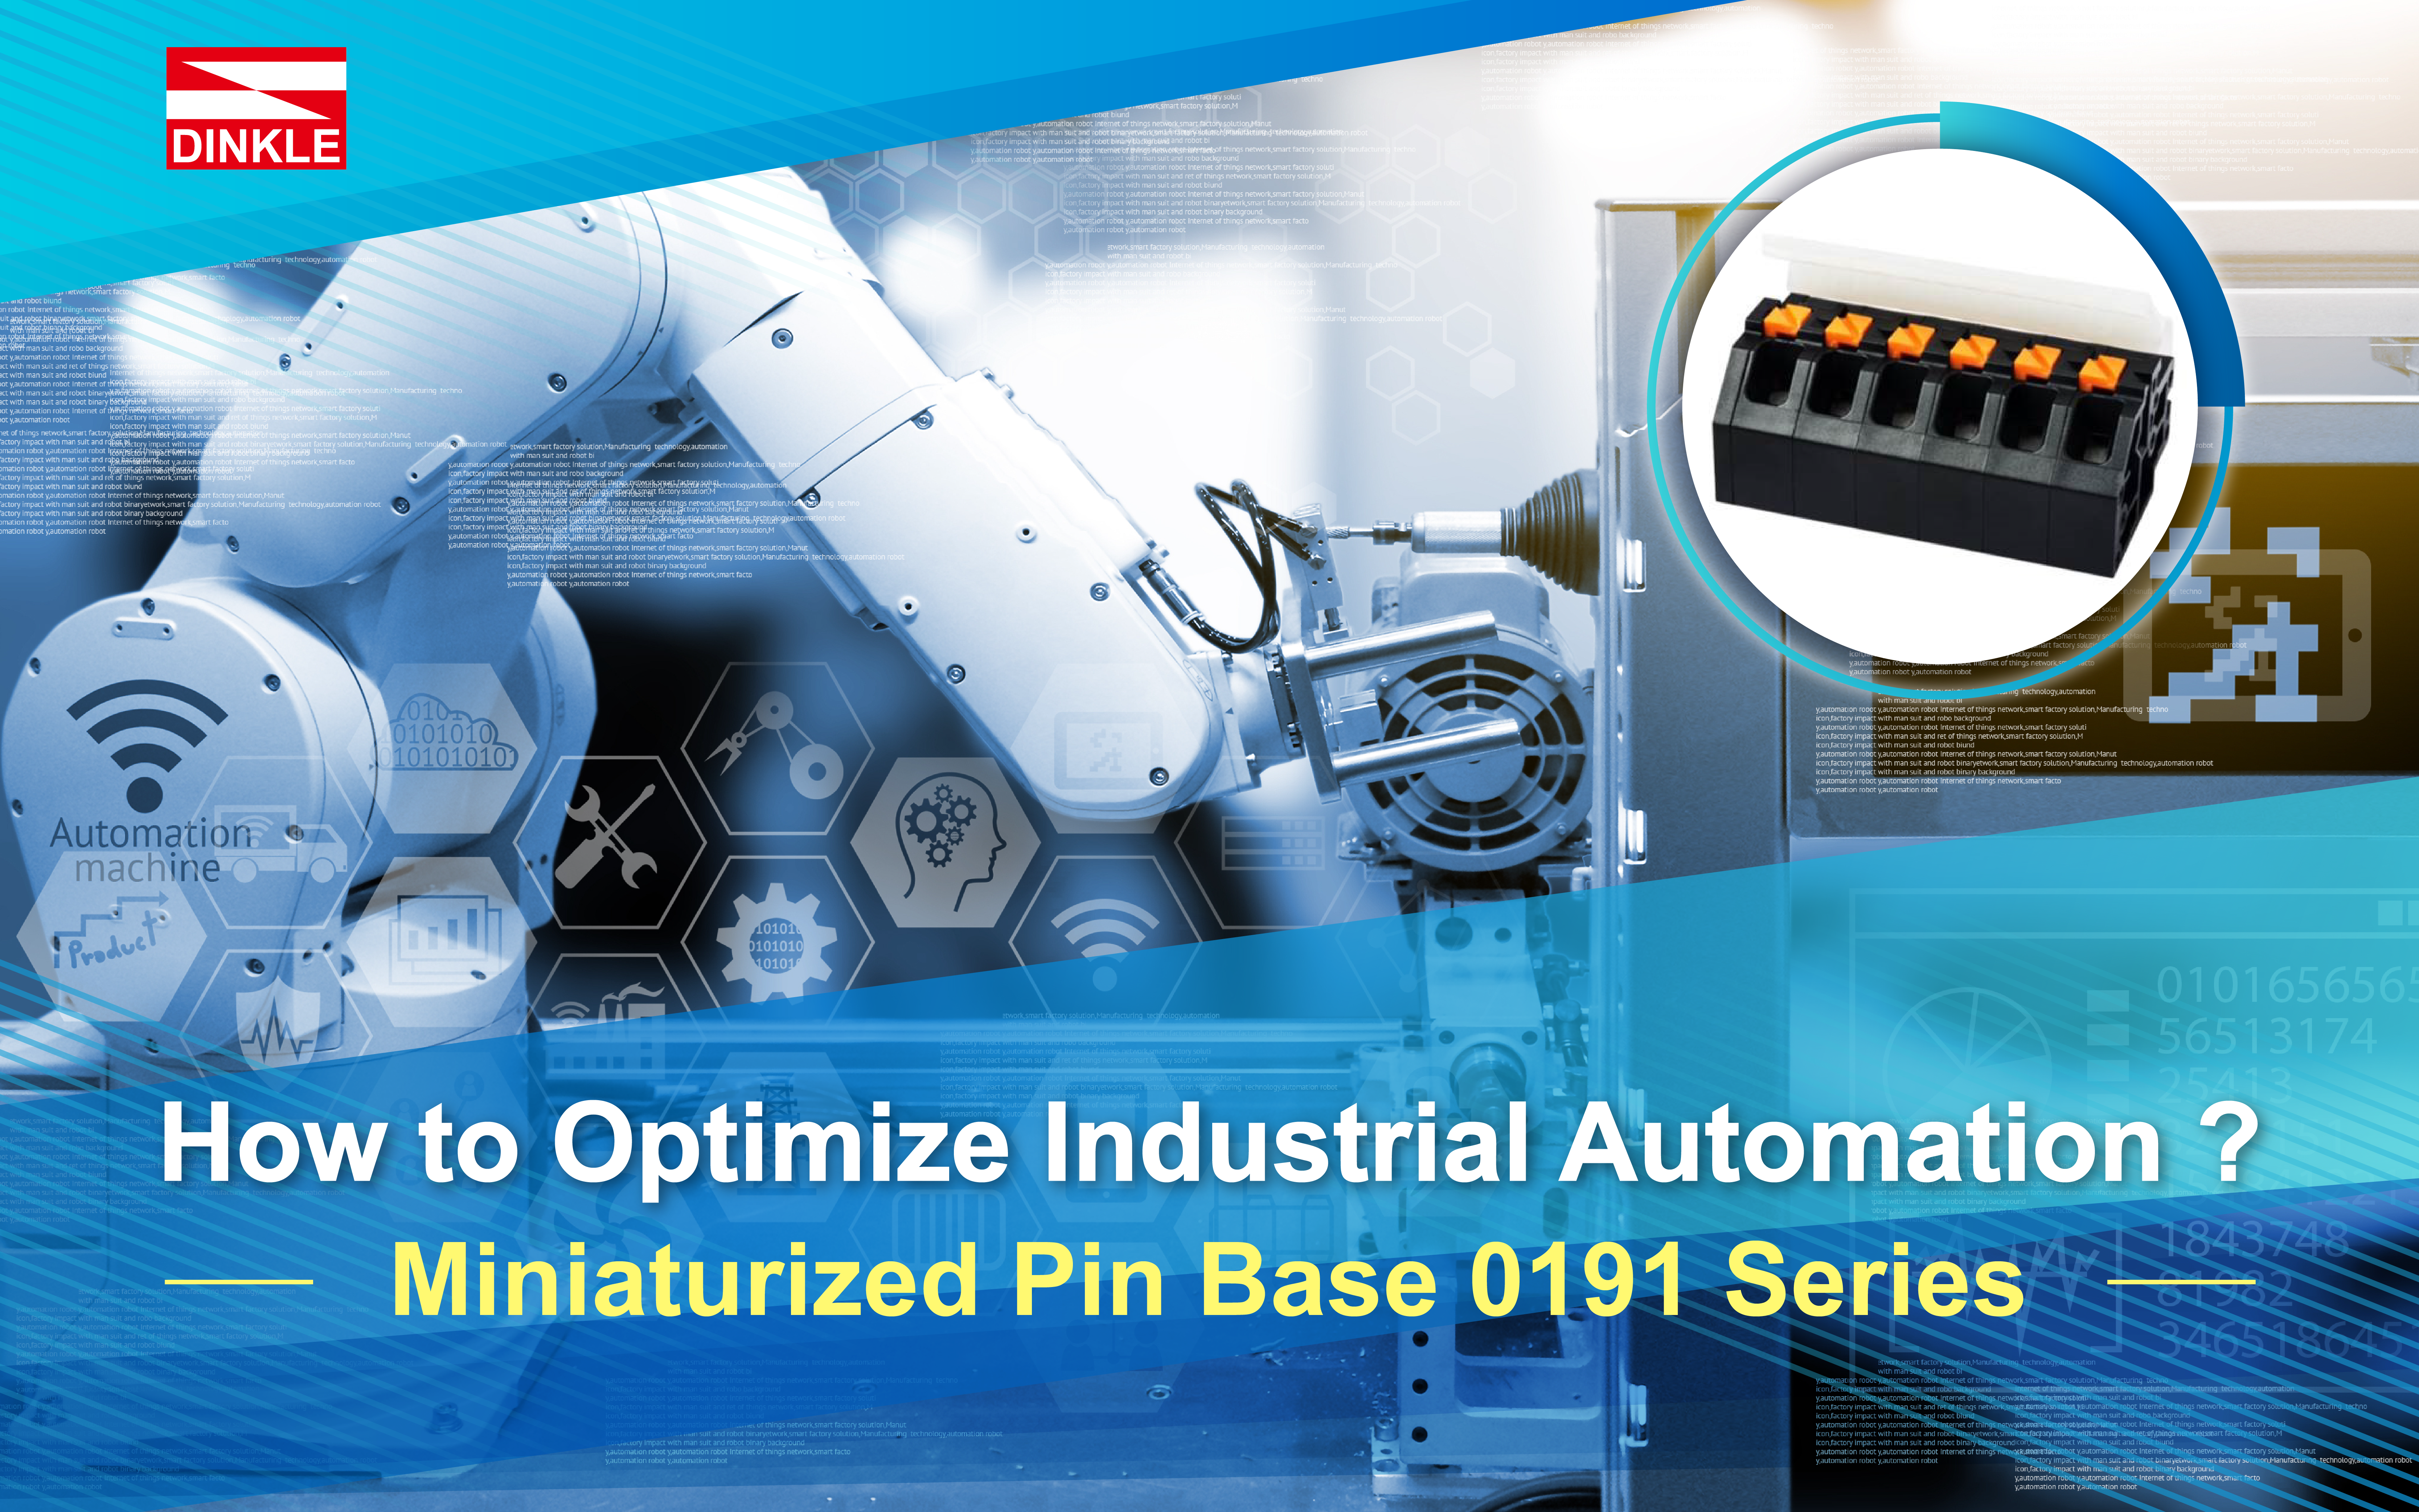 How to Optimize Industrial Automation ? 
Miniaturized Pin Base 0191 Series
